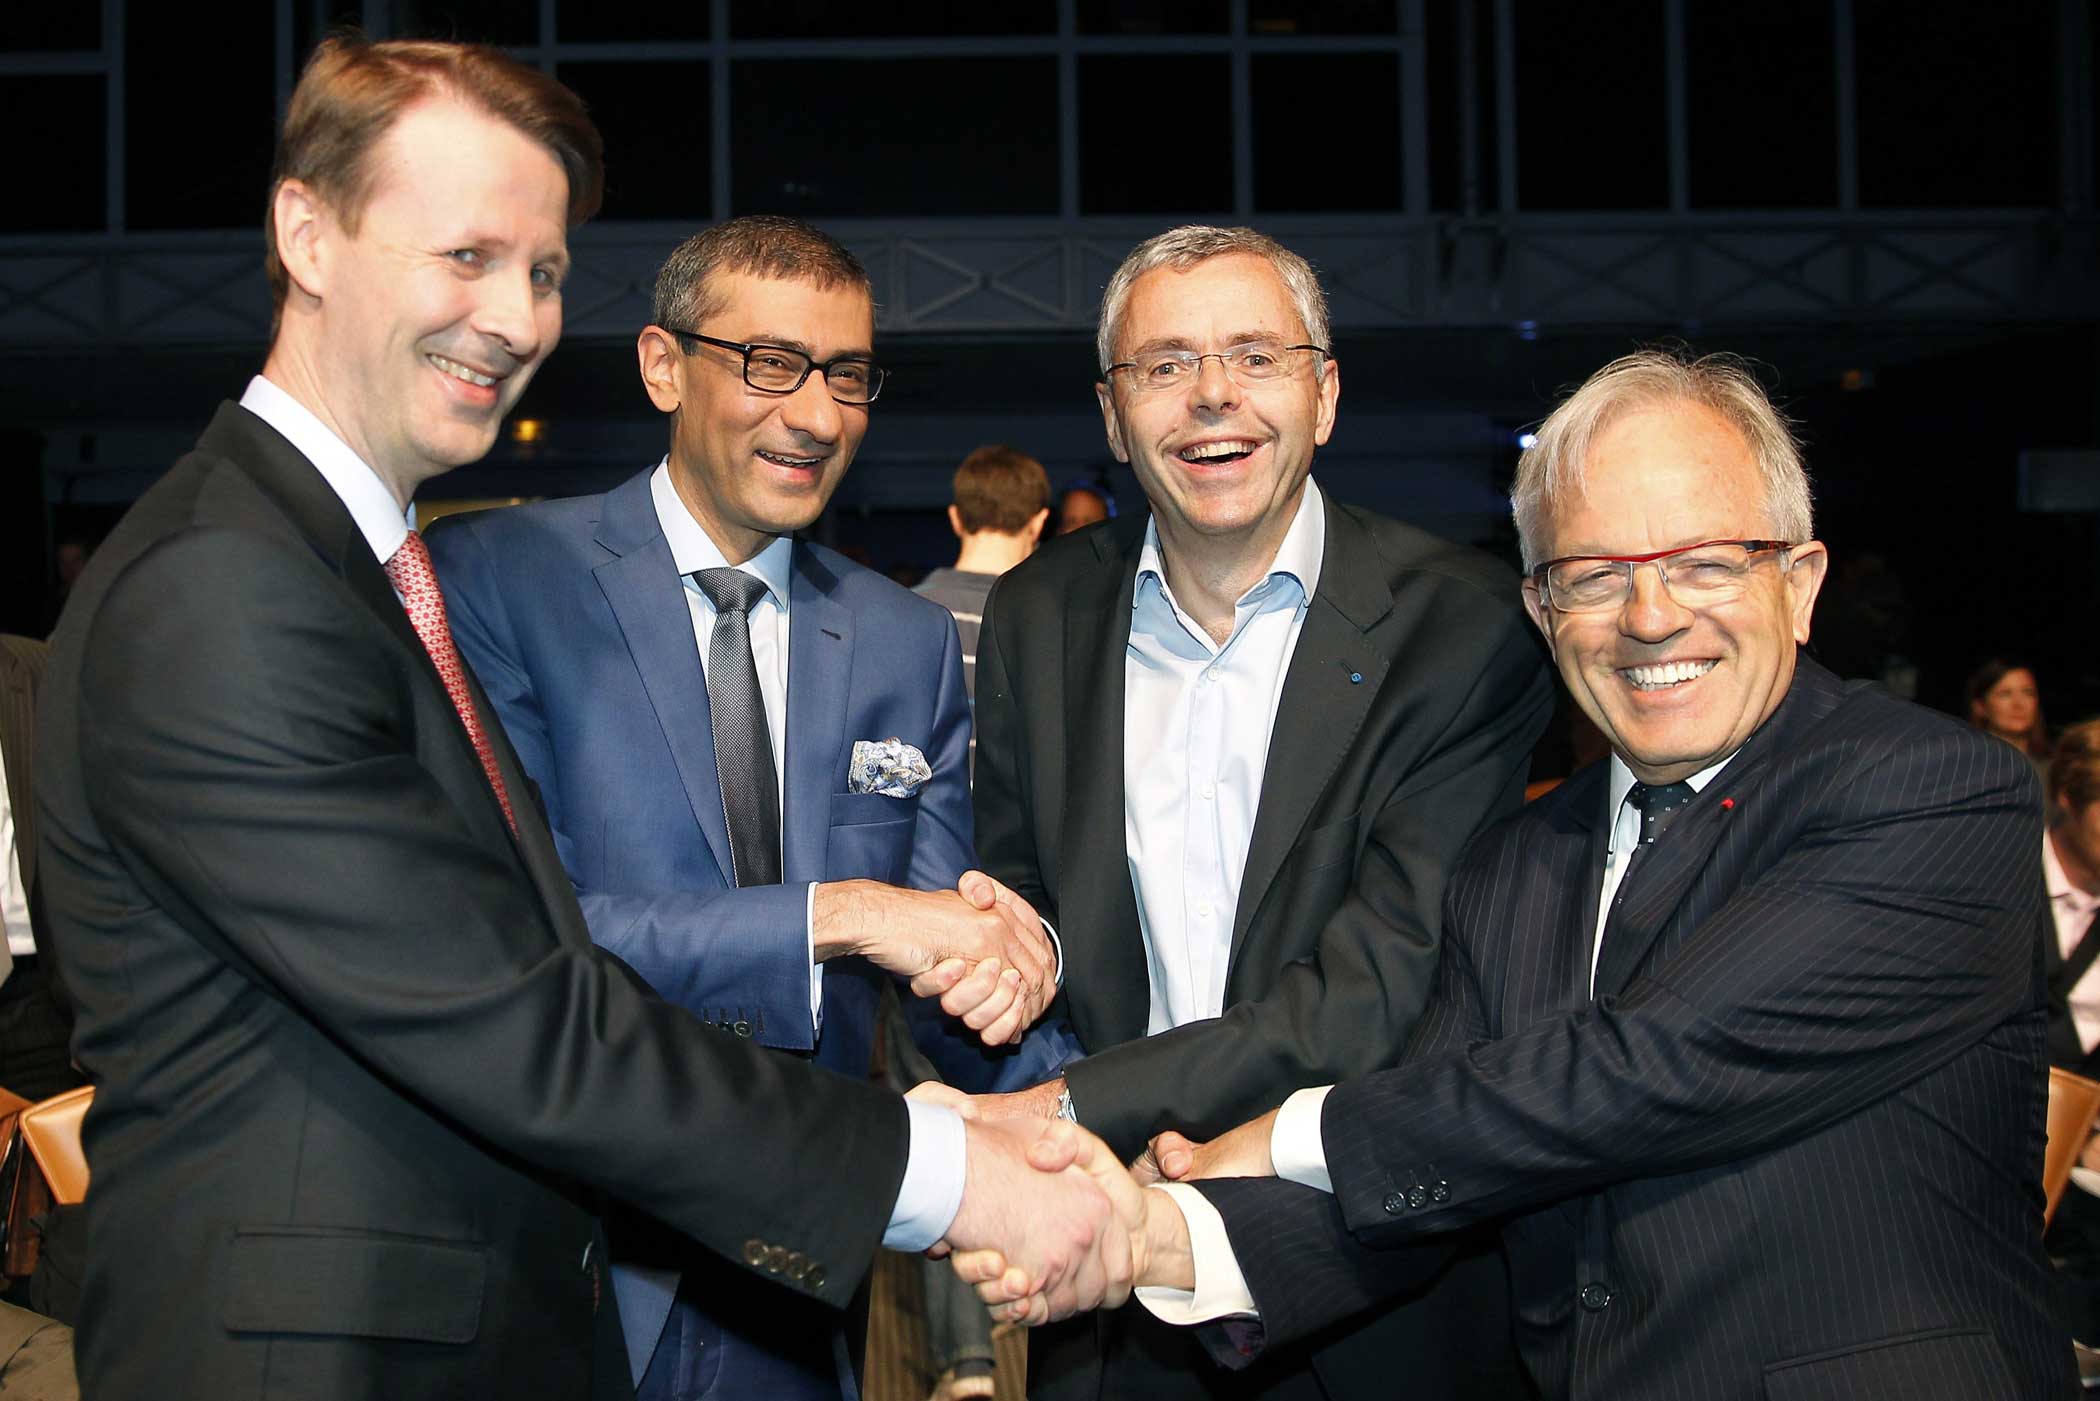 Nokia's chairman Risto Siilasmaa, Nokia's Chief Executive Rajeev Suri, telecommunications company Alcatel-Lucent's Chief Executive Officer Michel Combes and Alcatel-Lucent's chairman of the supervisory board Philippe Camus shake hands prior a press conference on April 15, 2015 in Paris.